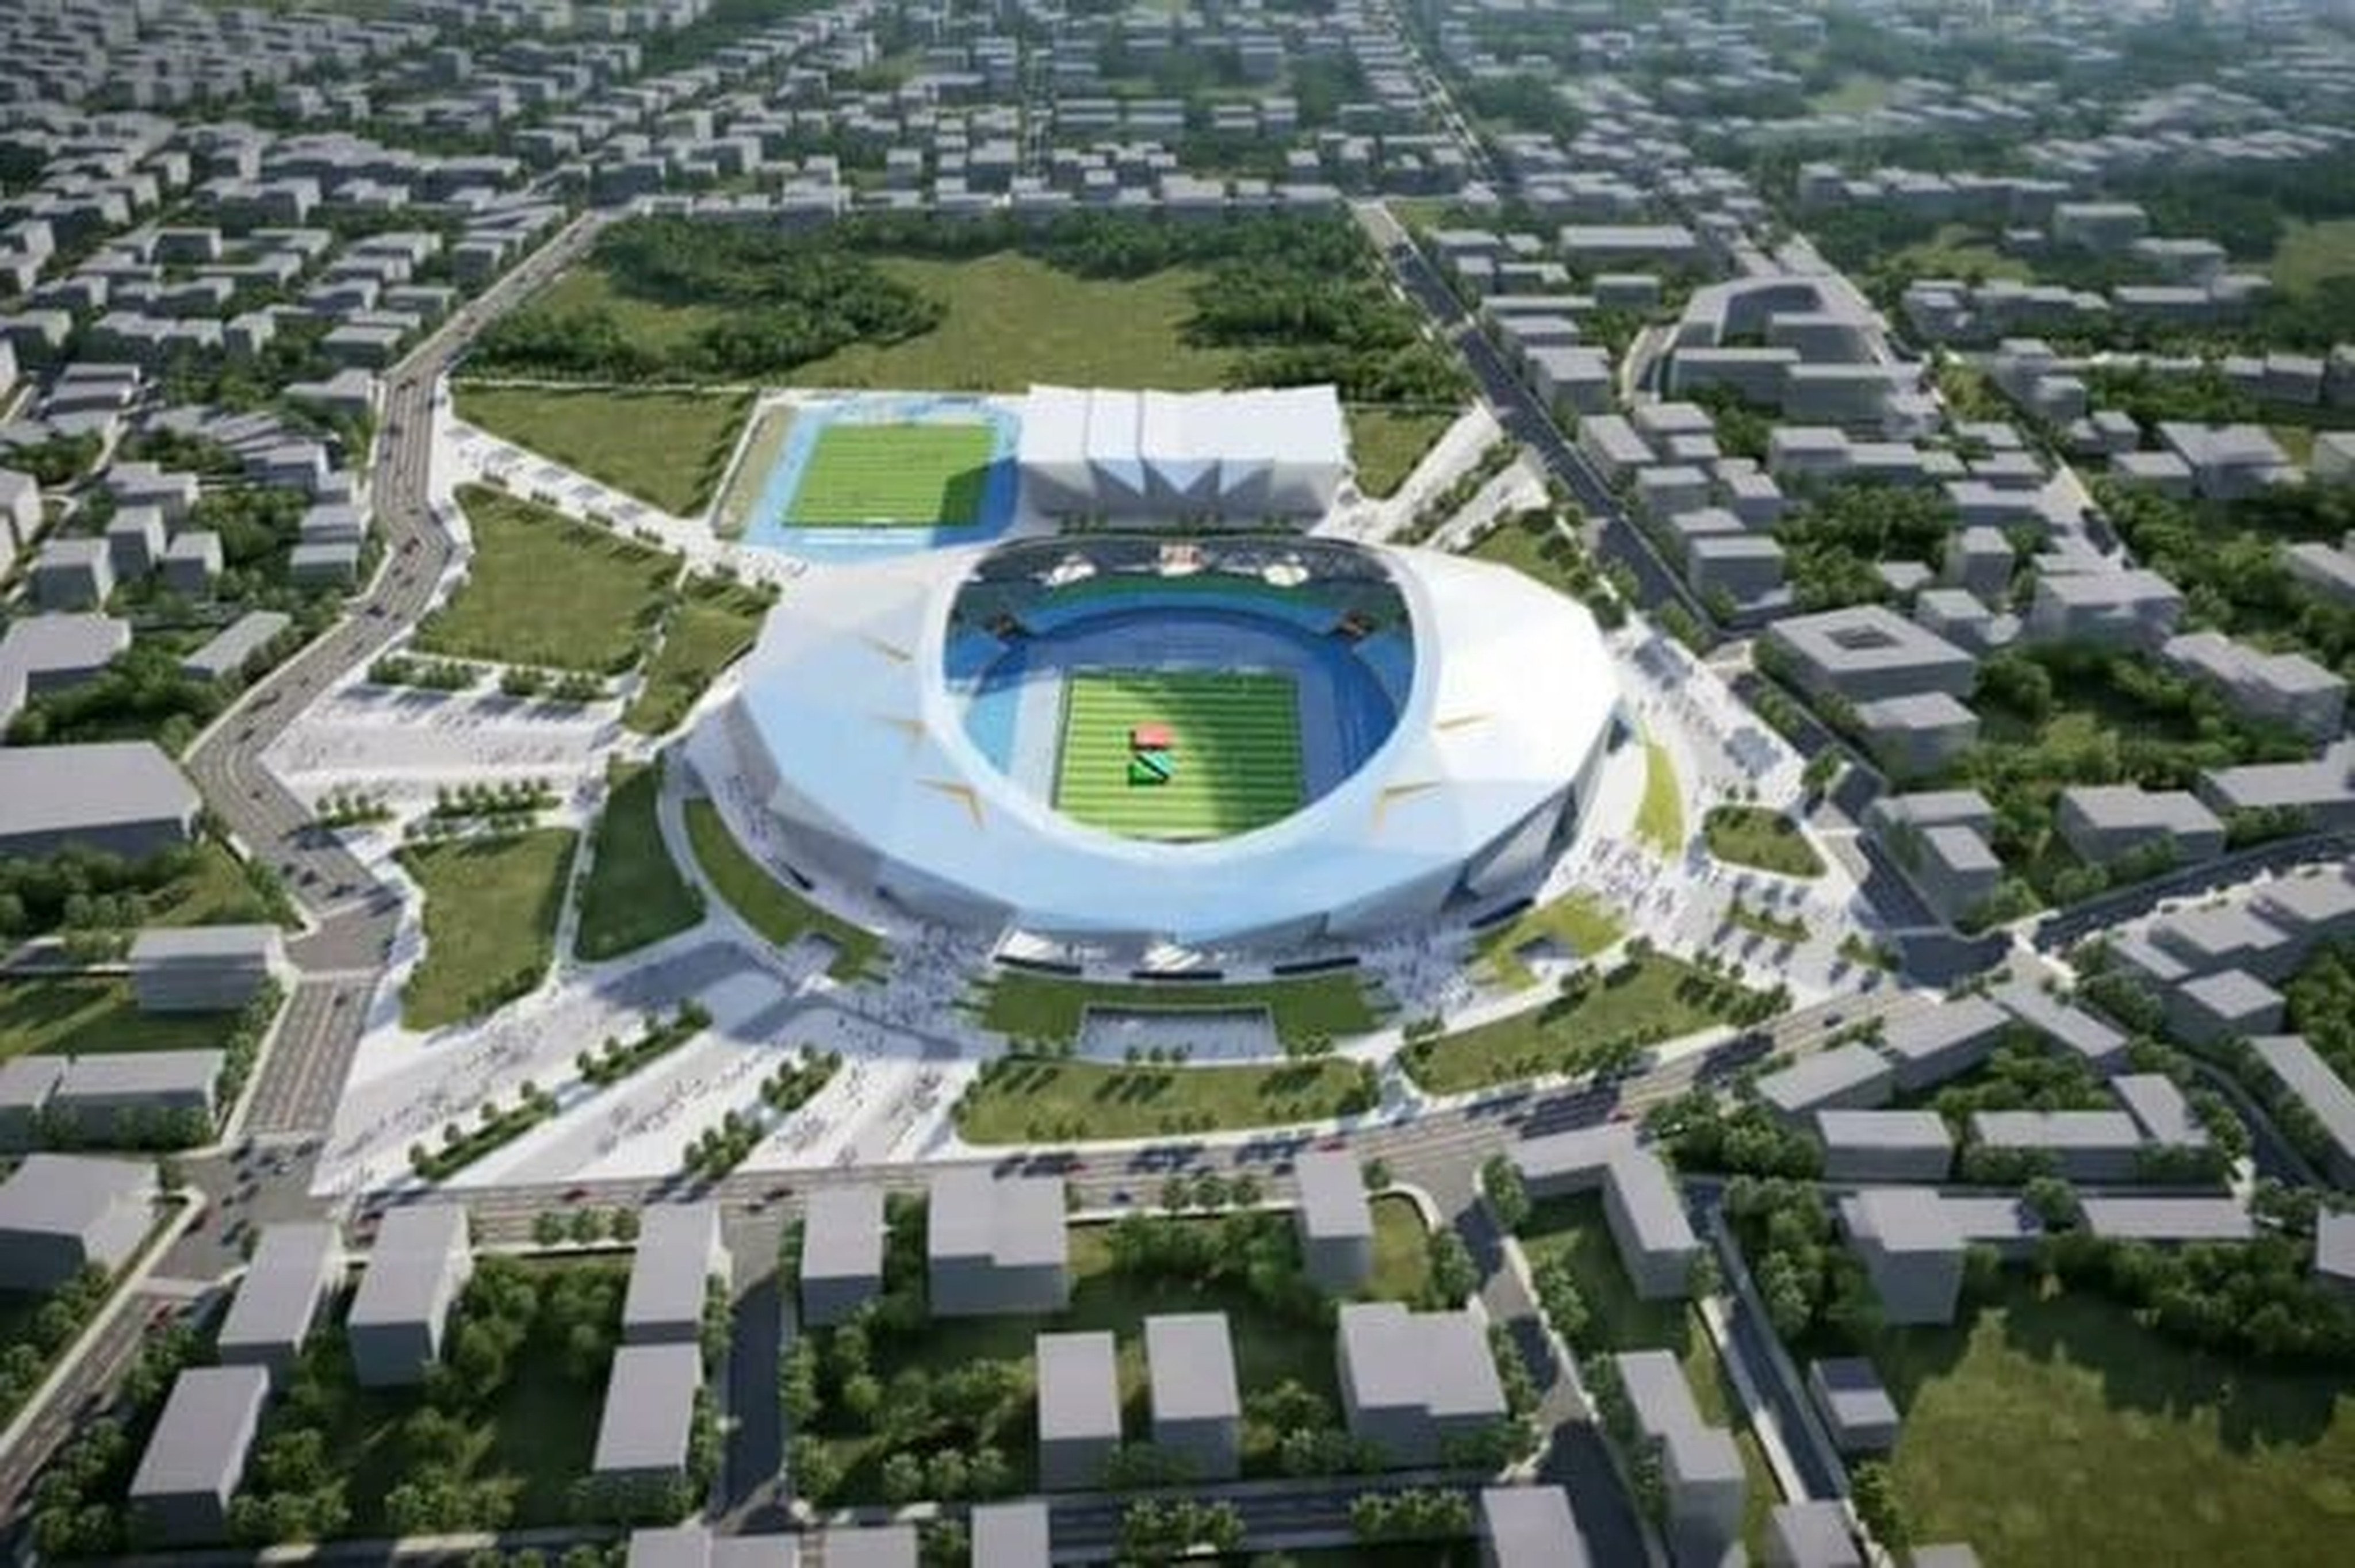 An artist’s impression of the Dr Samia Suluhu Hassan Stadium in Arusha, Tanzania, which is expected to be among the venues for the 2027 Africa Cup of Nations. Photo: Facebook/Mavundathanda Ray-ray Michael